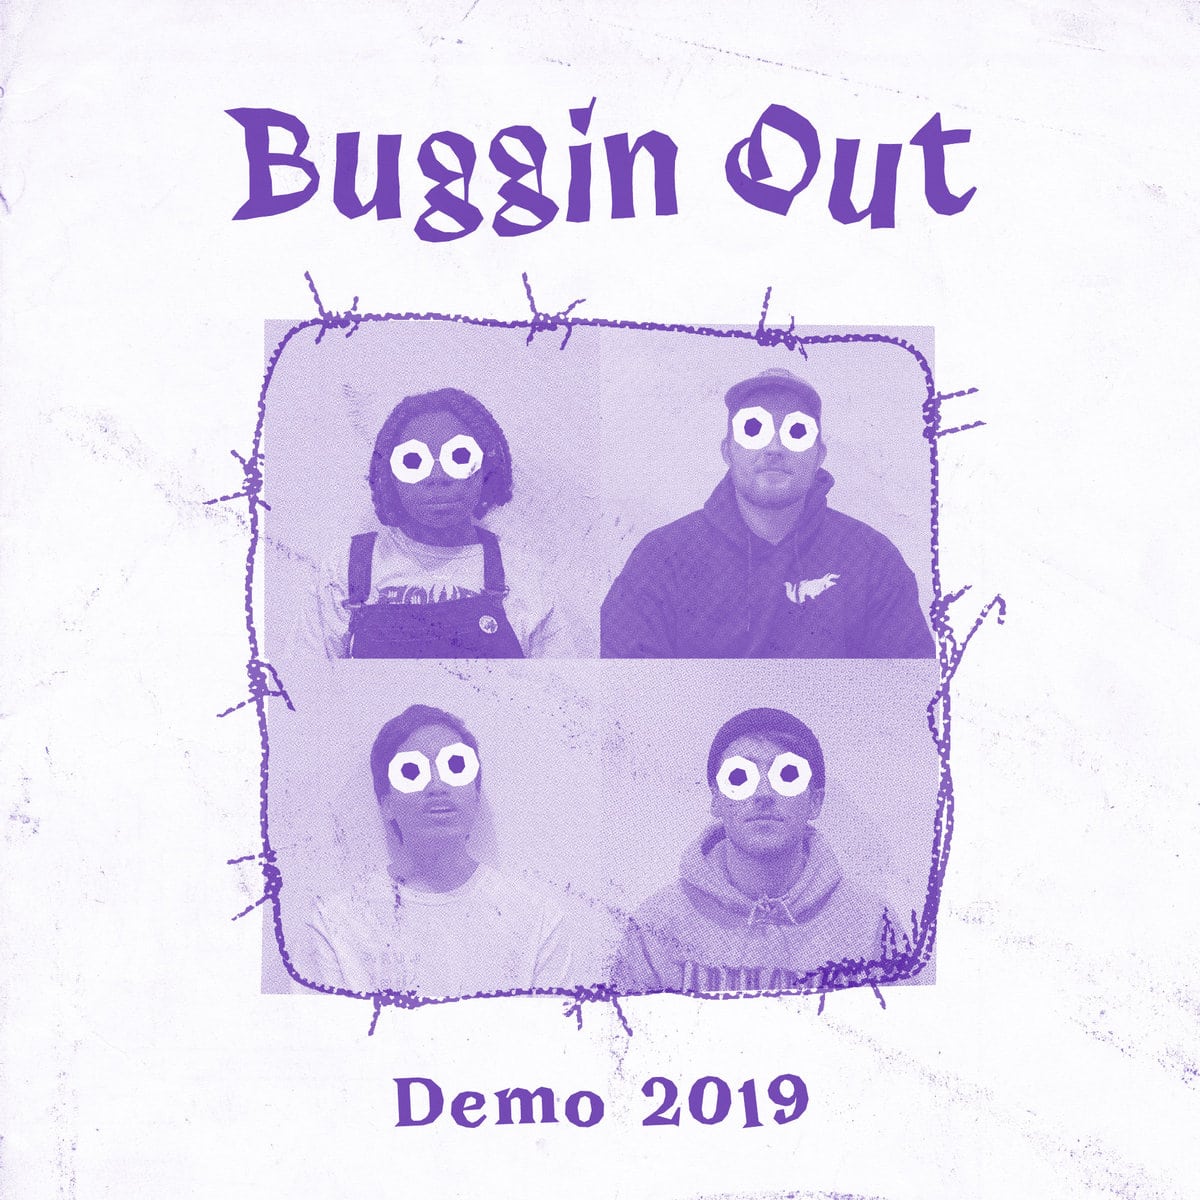 Out demo. Buggin out. Buggin.